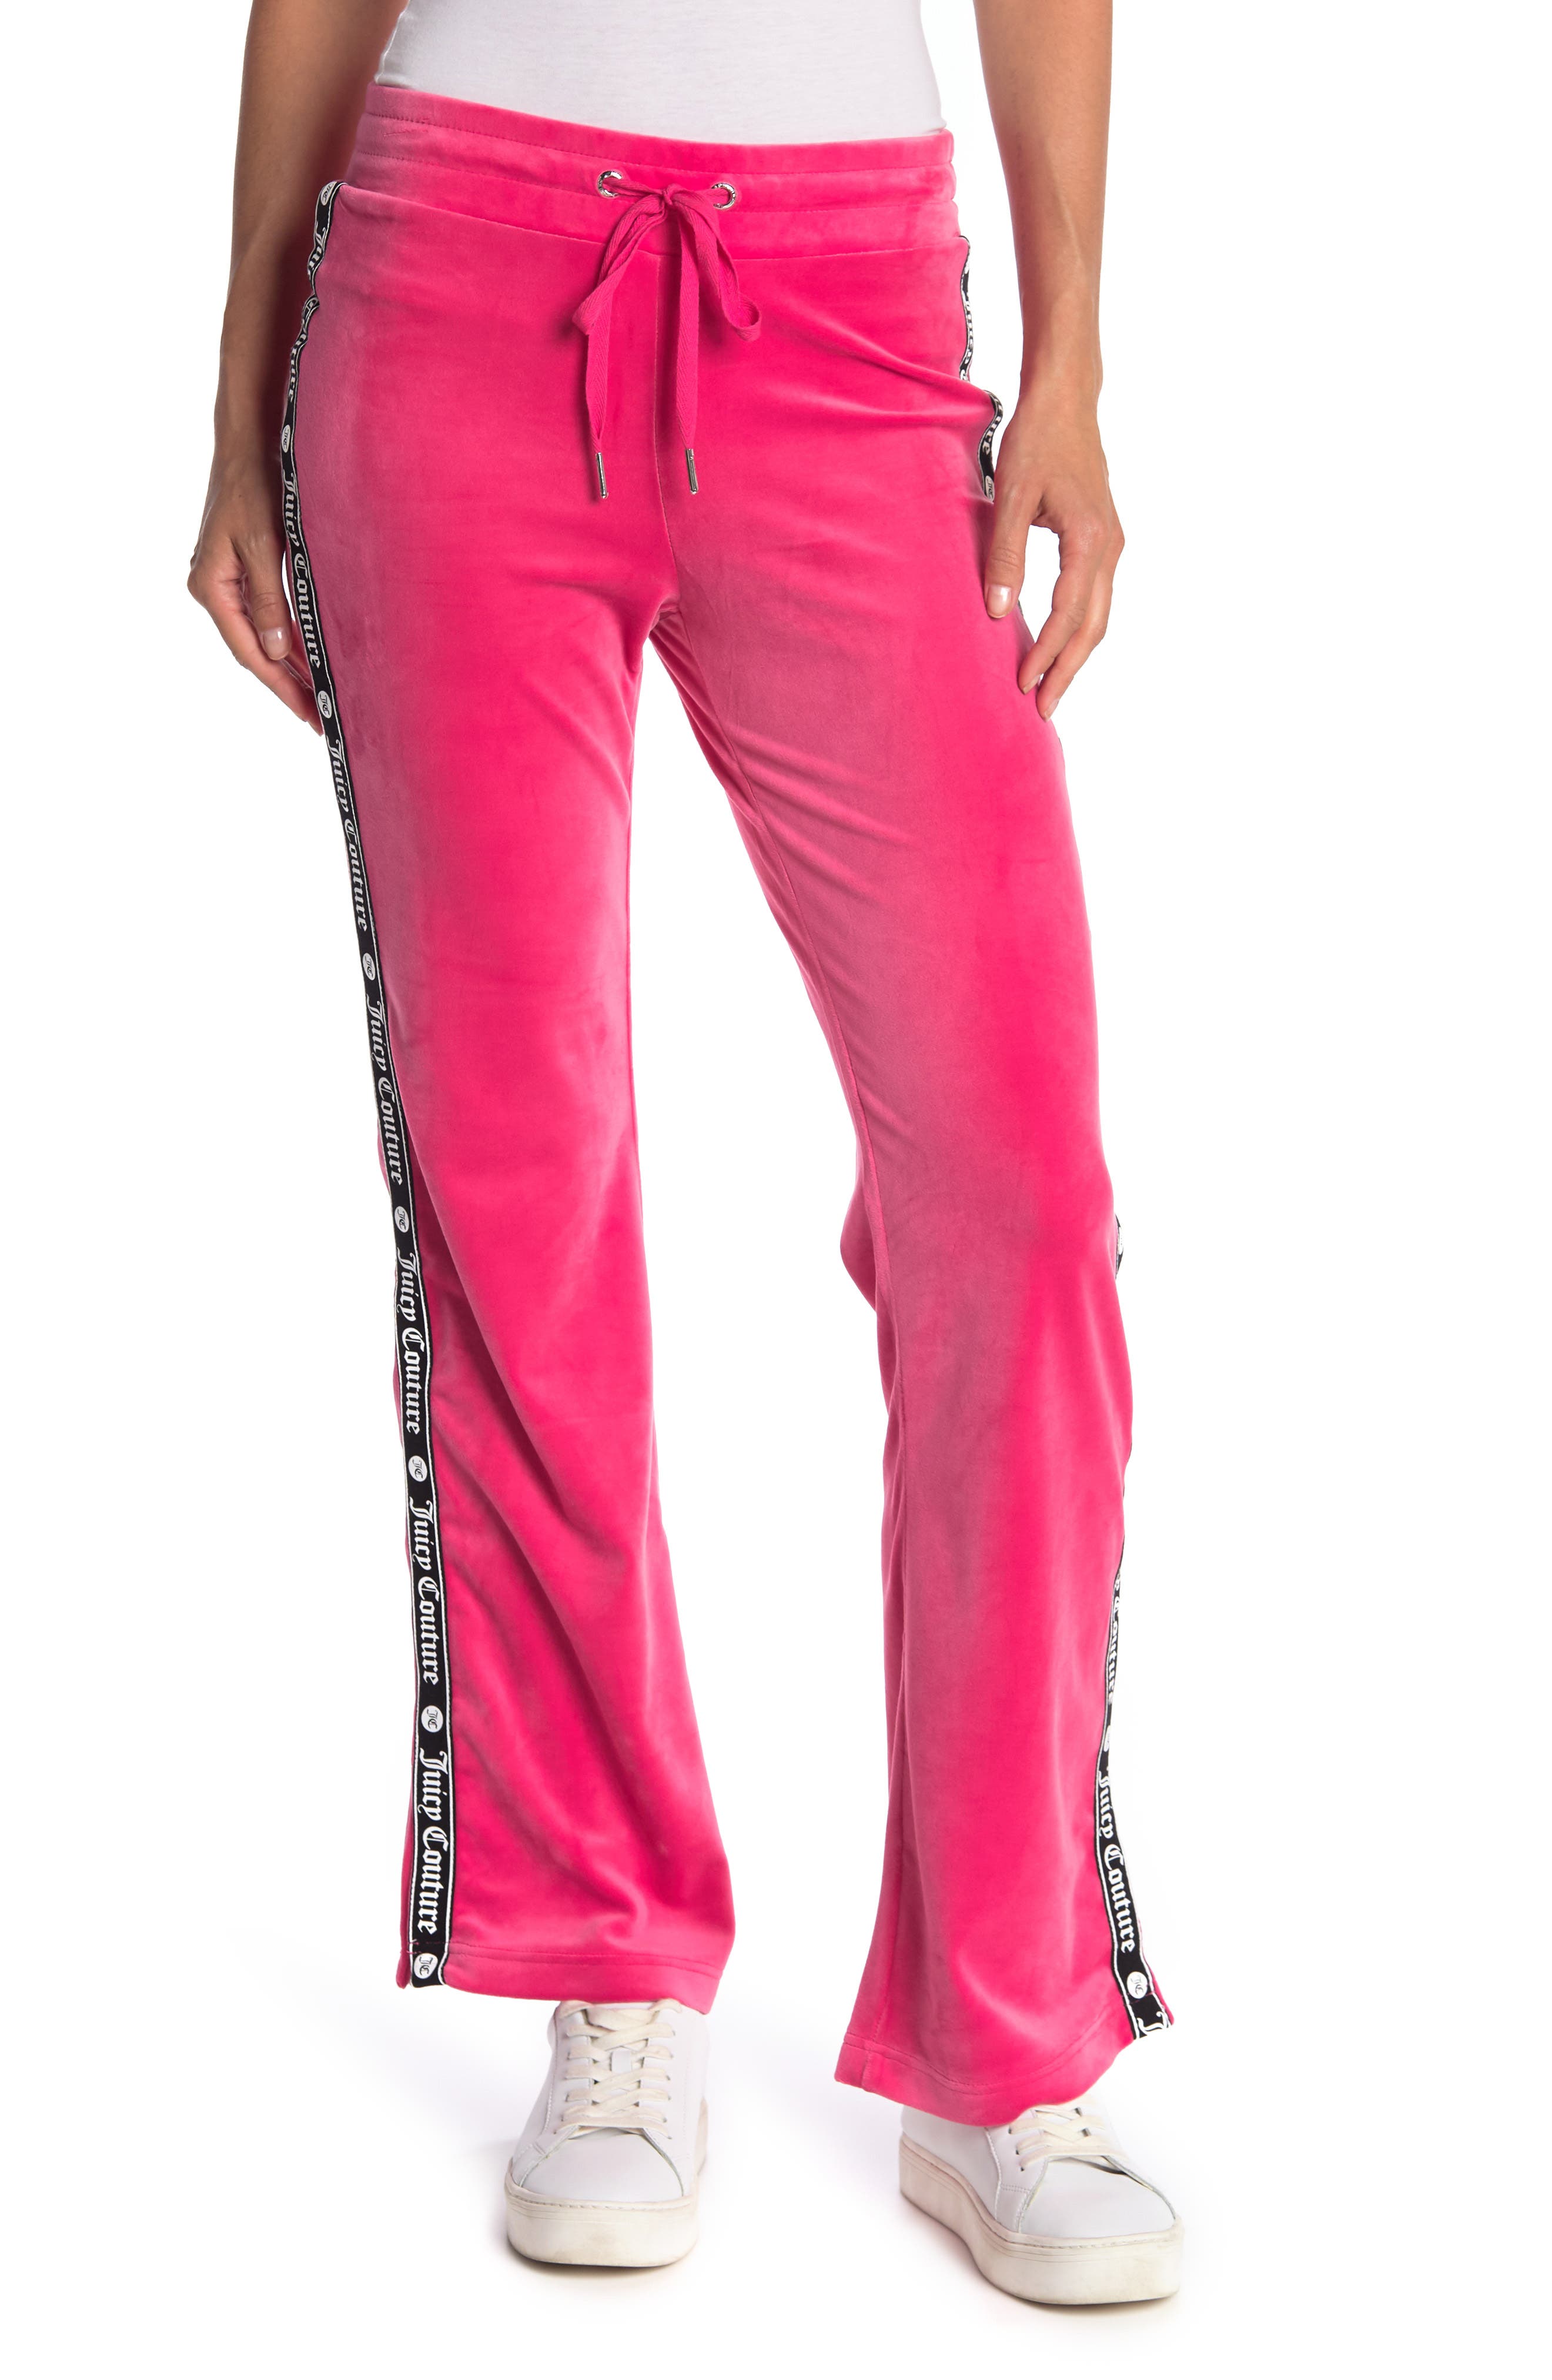 Juicy Couture Velour Drawstring Track Pants Nordstrom Rack